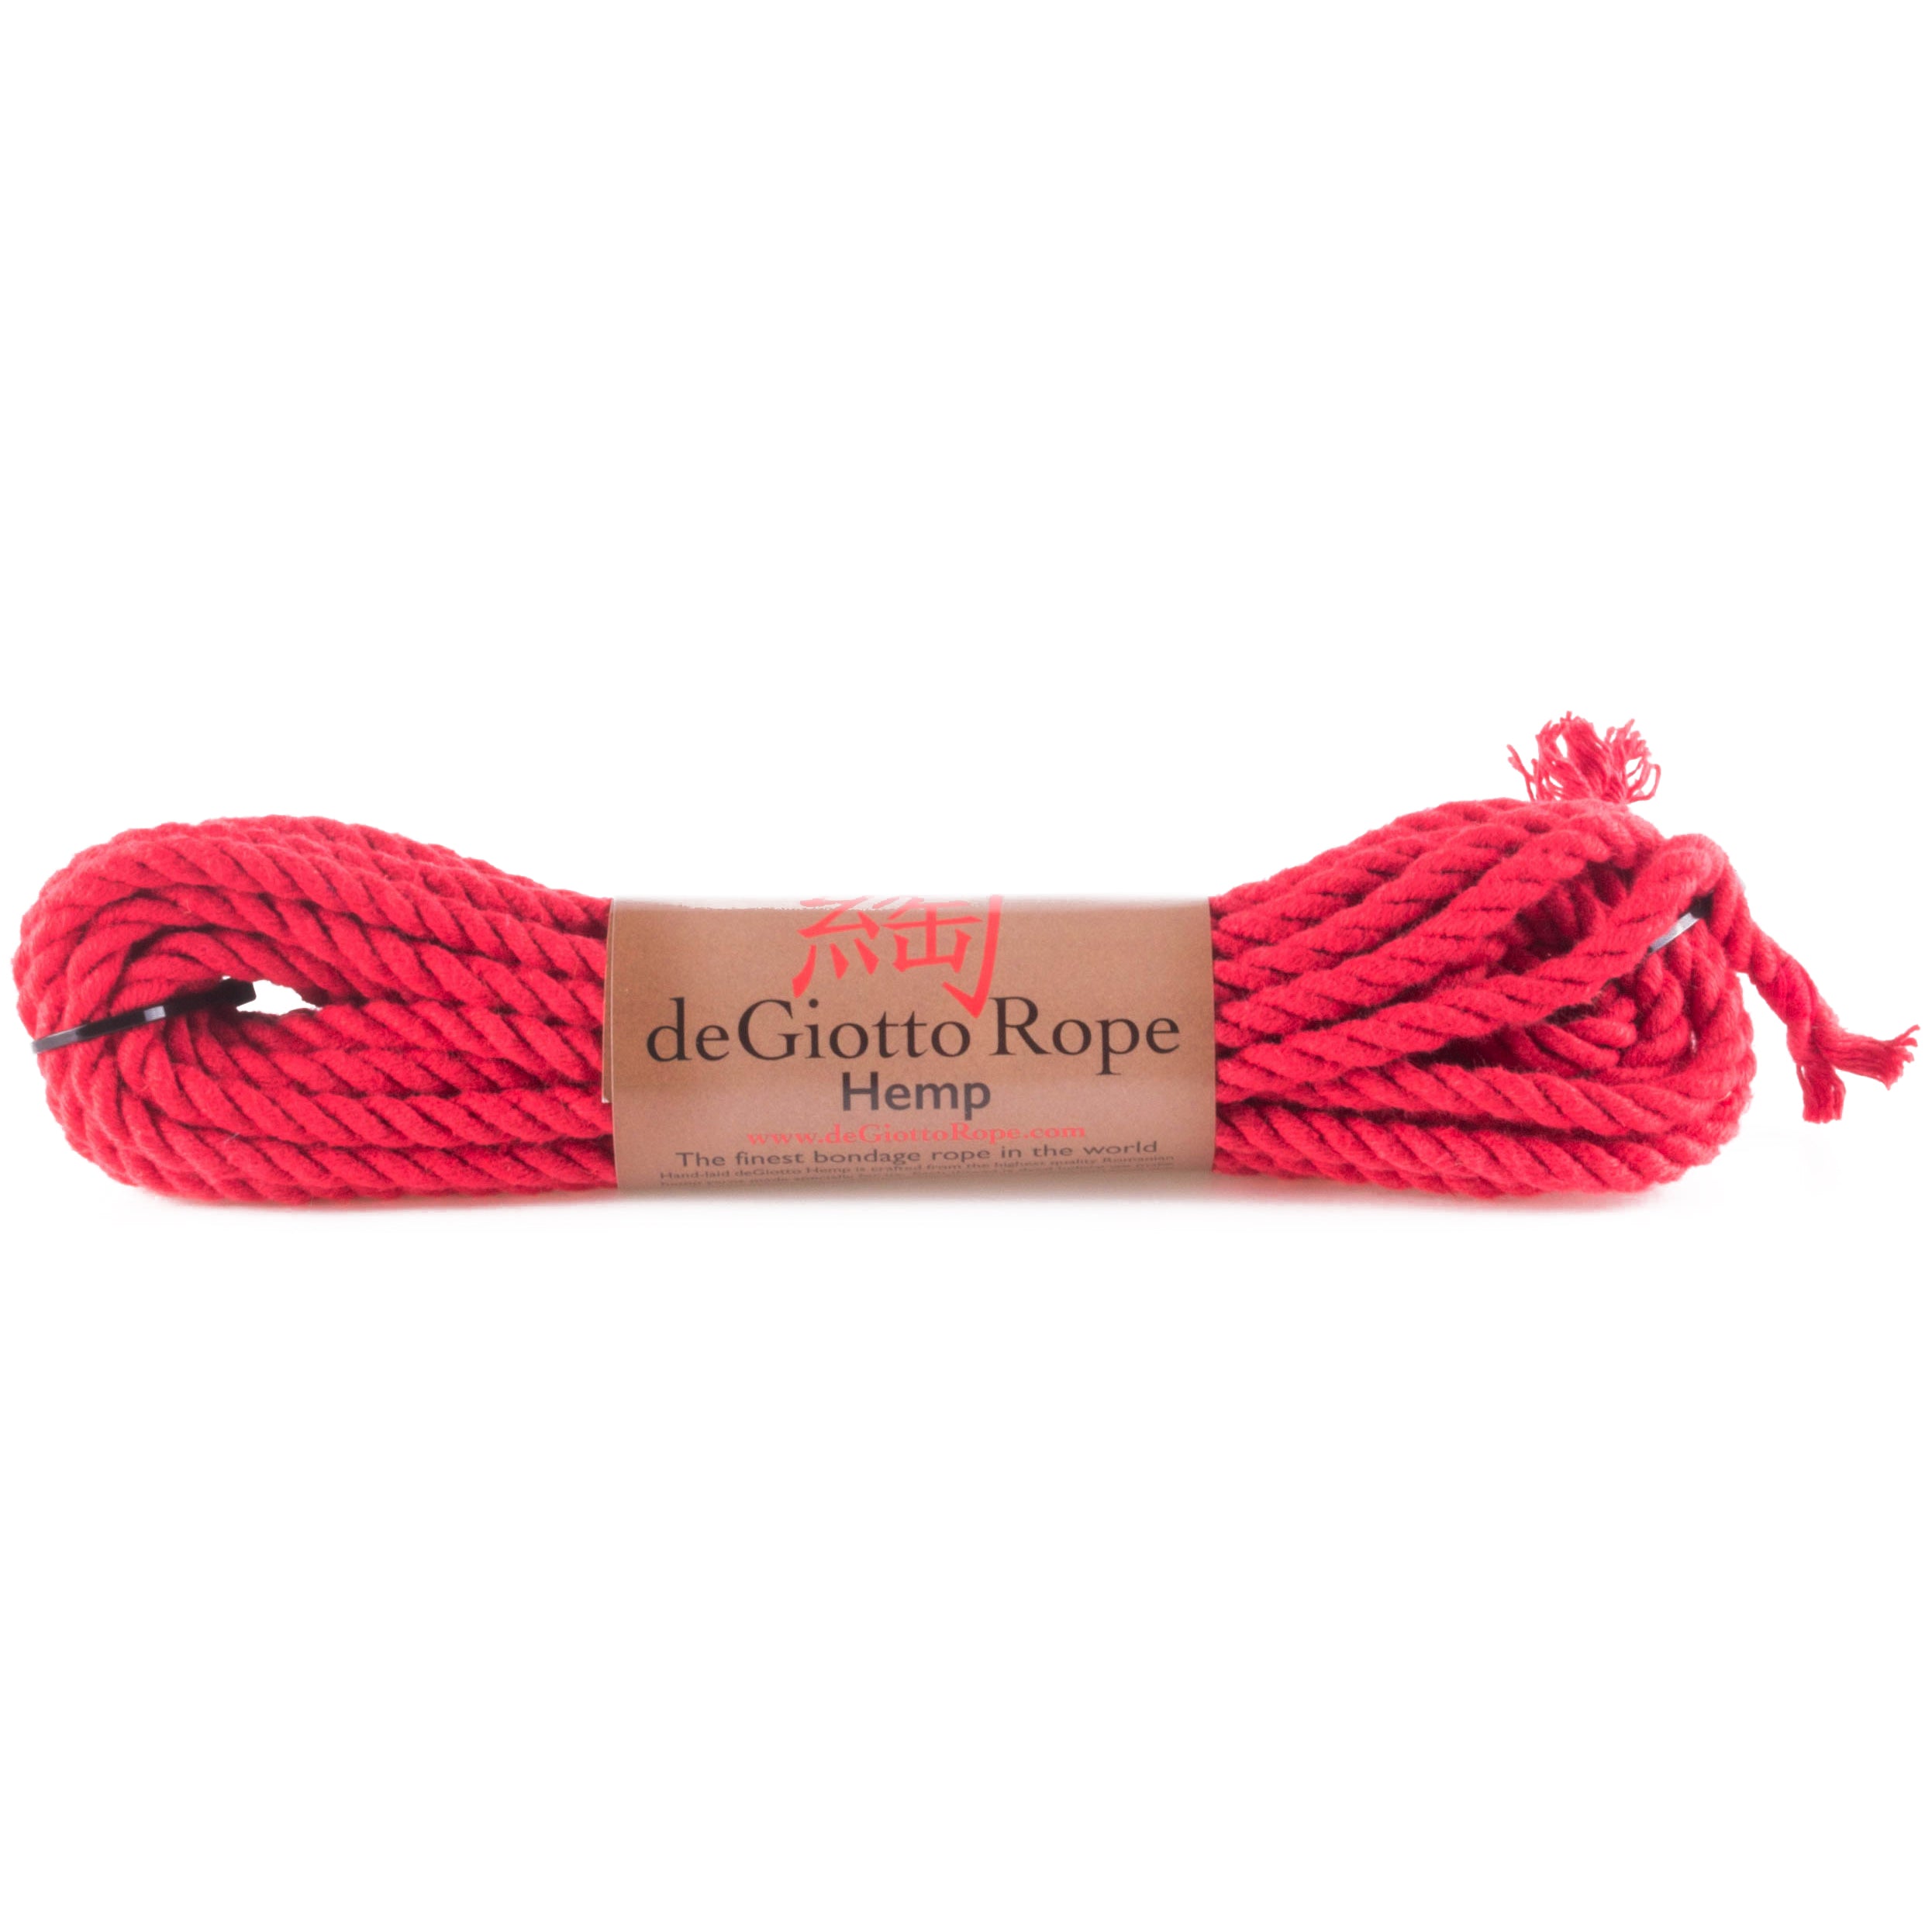 Hemp Bondage Rope Shibari Rope Booster Kit Mature (2) 30ft and (2) 15ft 6mm  ropes - 4 colors to choose from